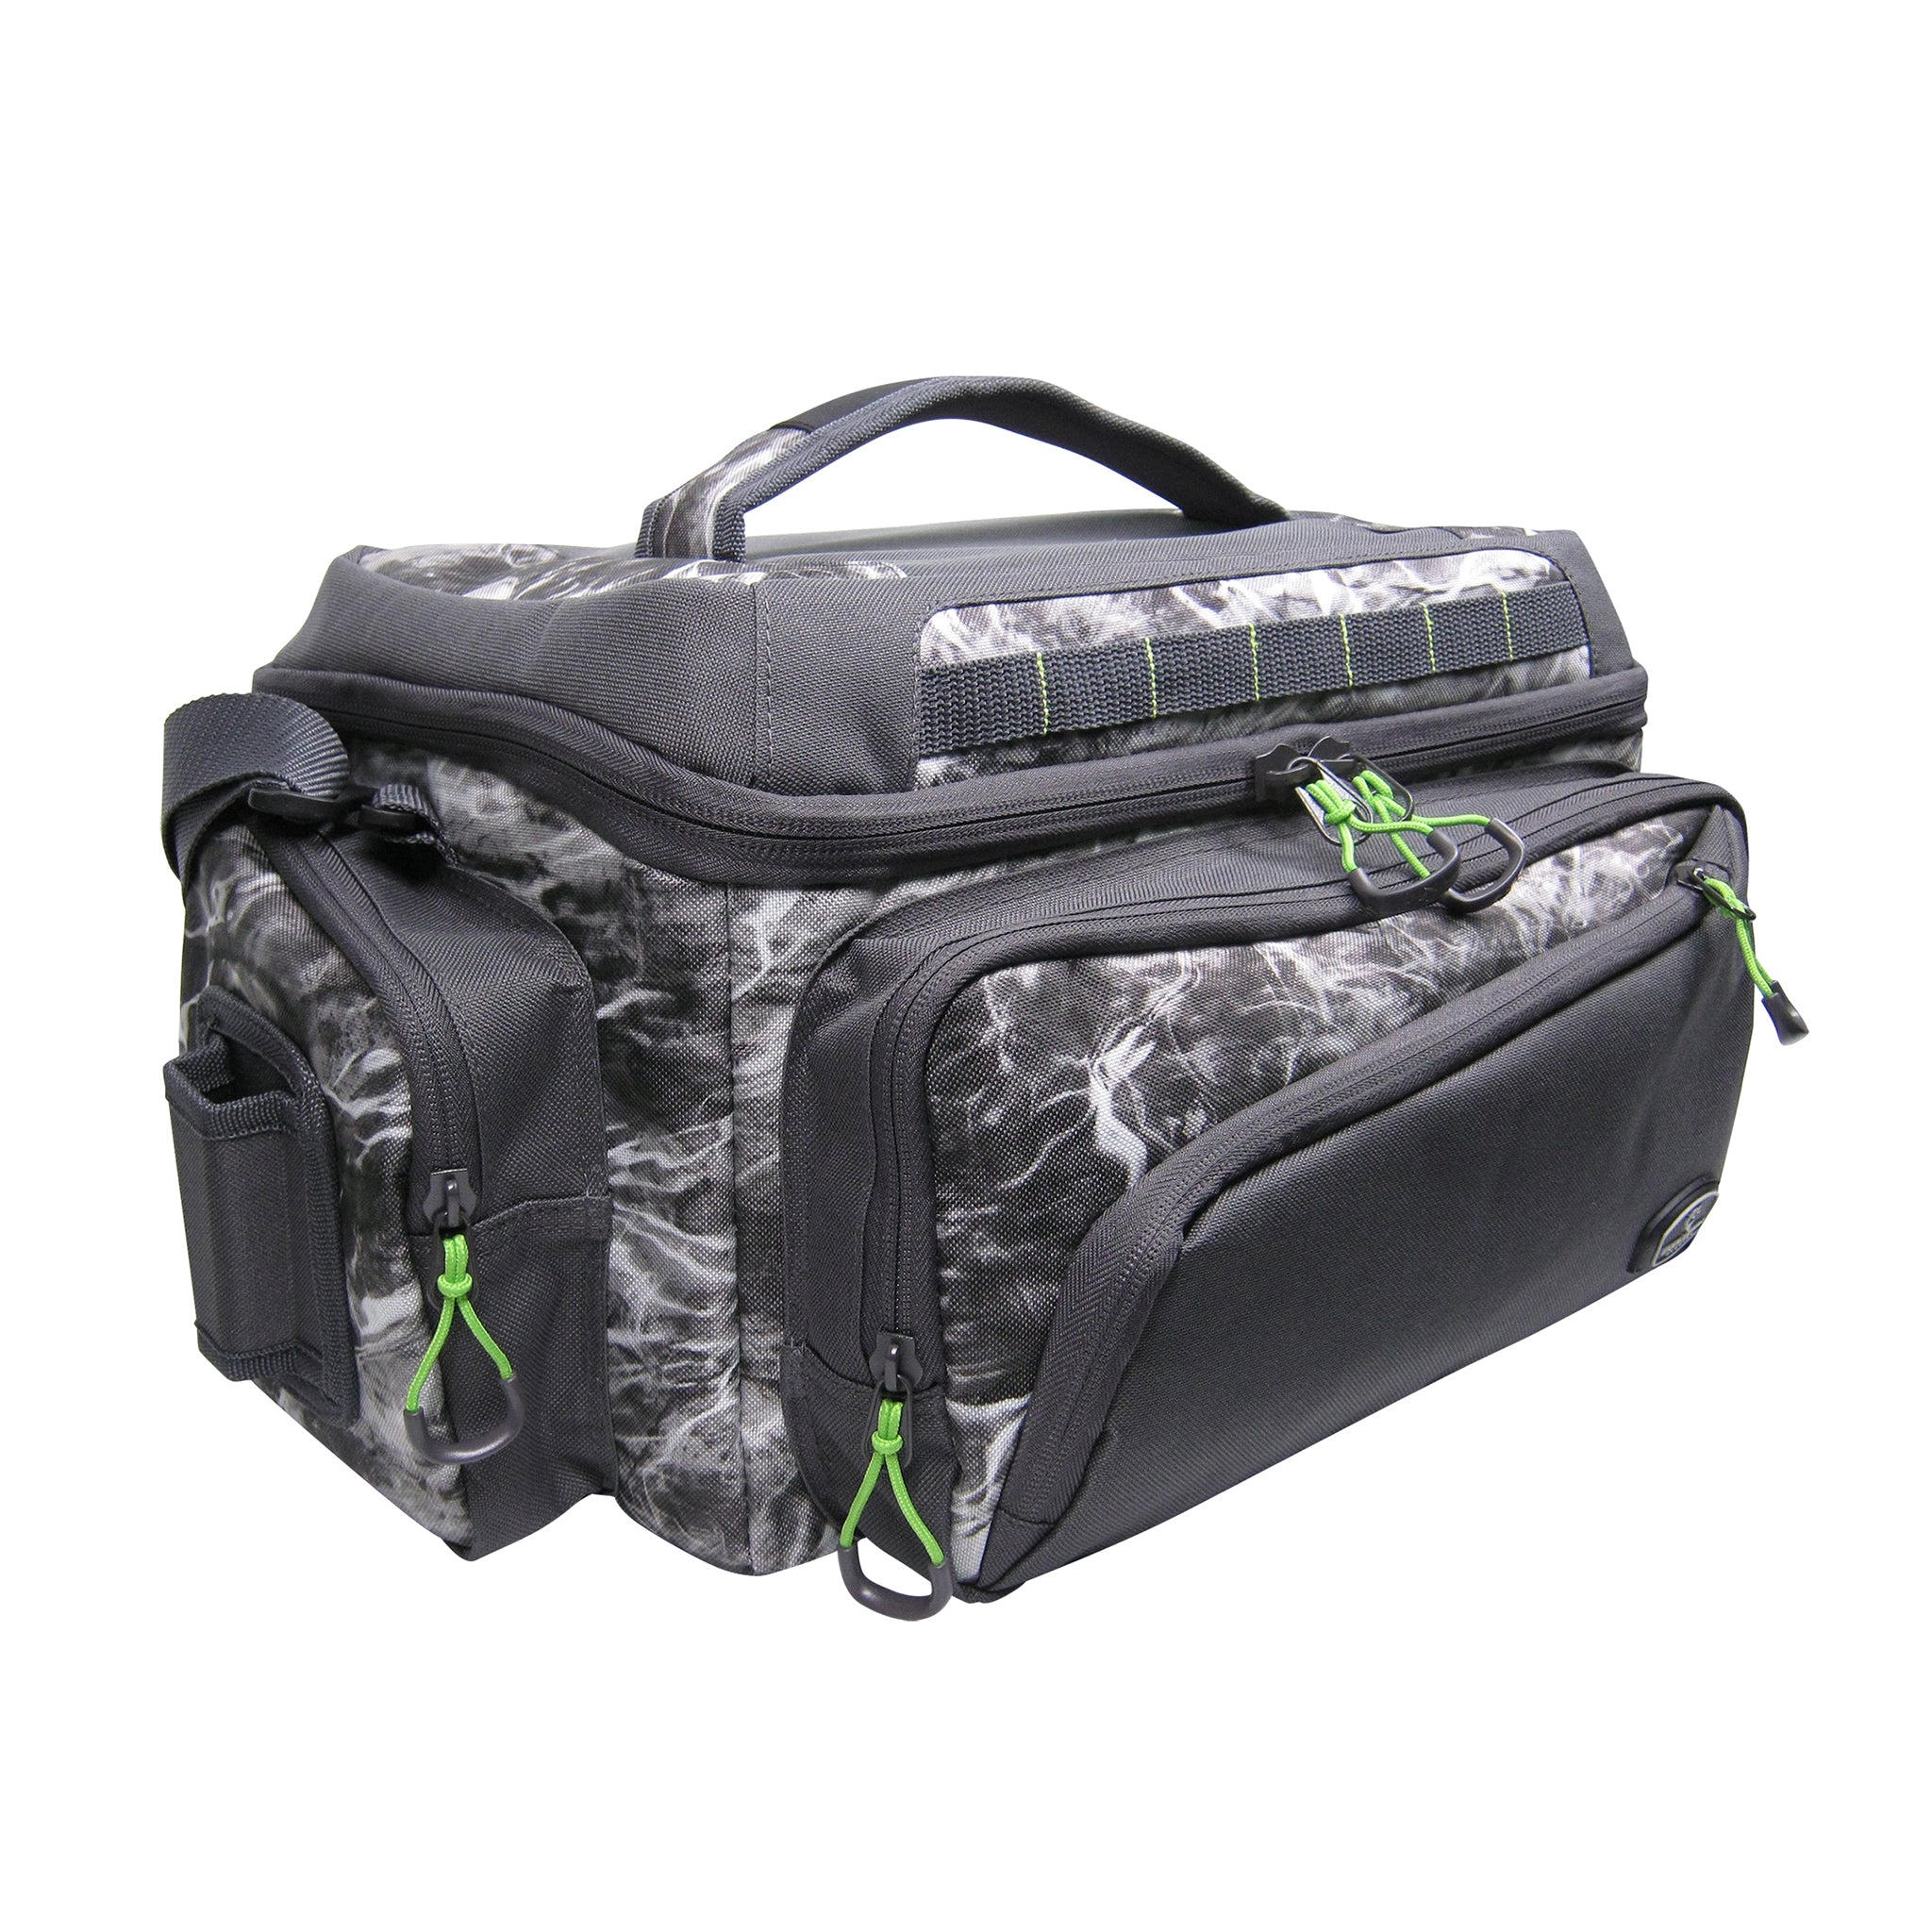 Large Mouth Mossy Oak Fishing Tackle Bags 3700 Evolution Fishing Evolution Outdoor